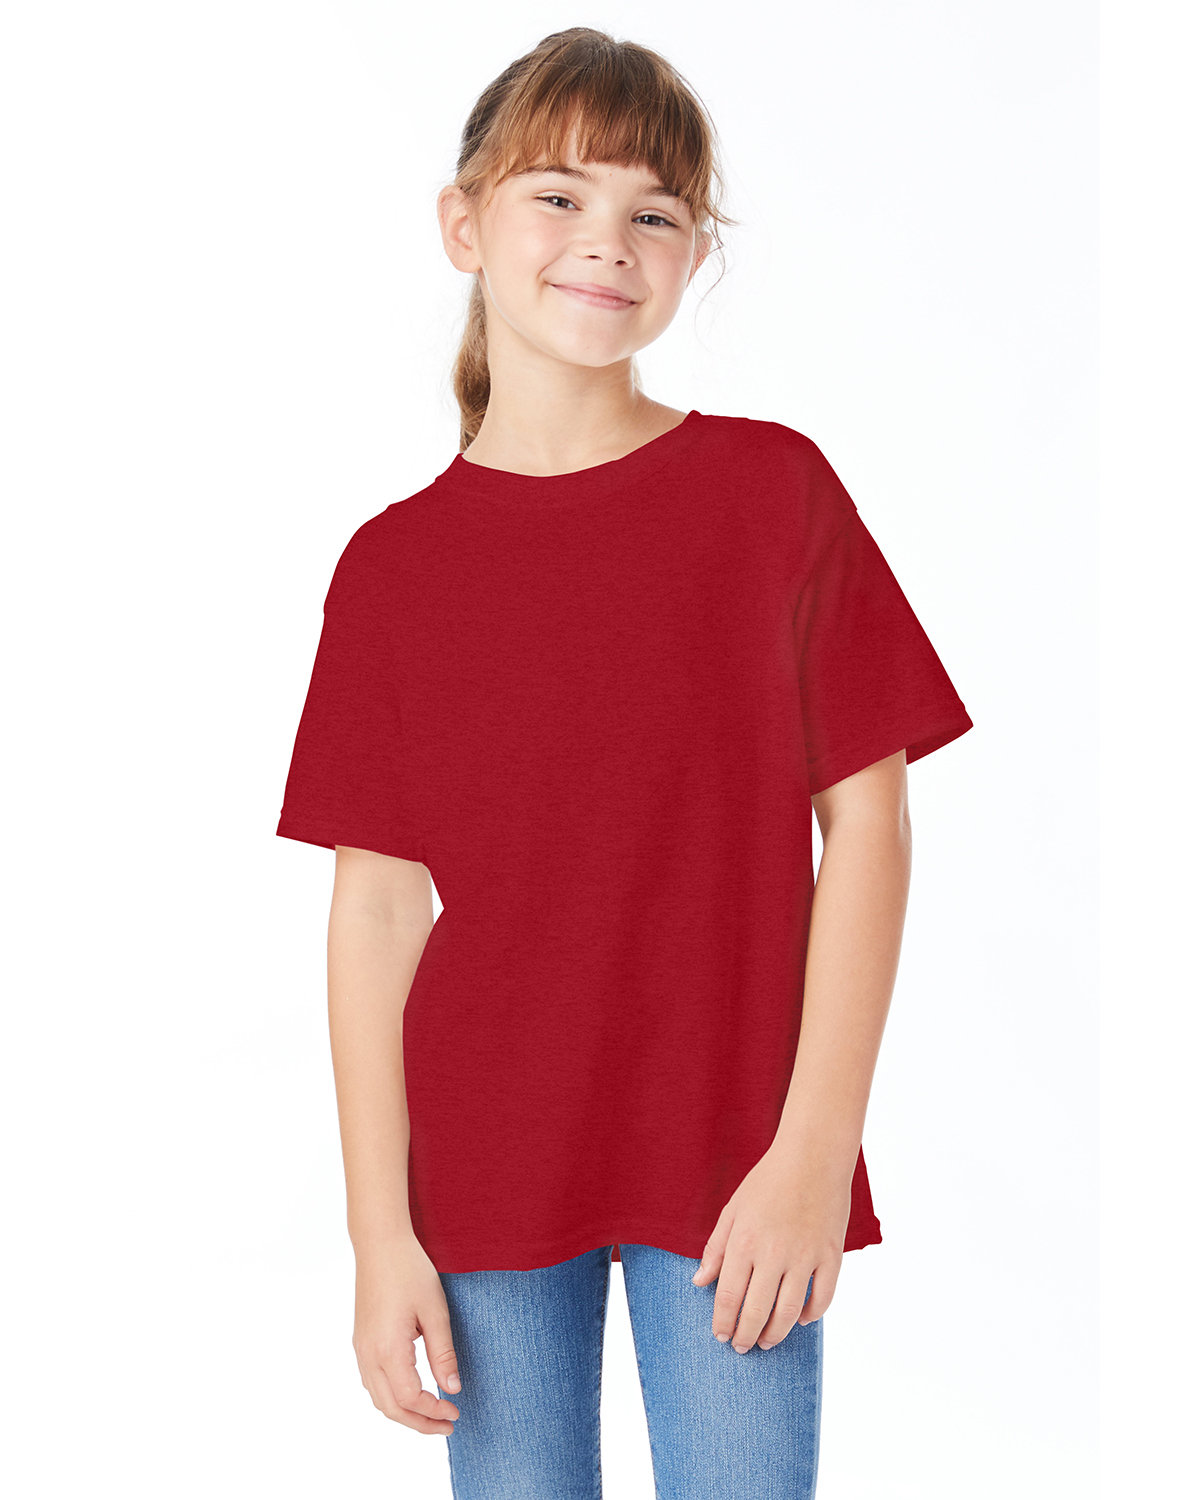 Hanes Youth Essential-T T-Shirt RED PEPPER HTHR 